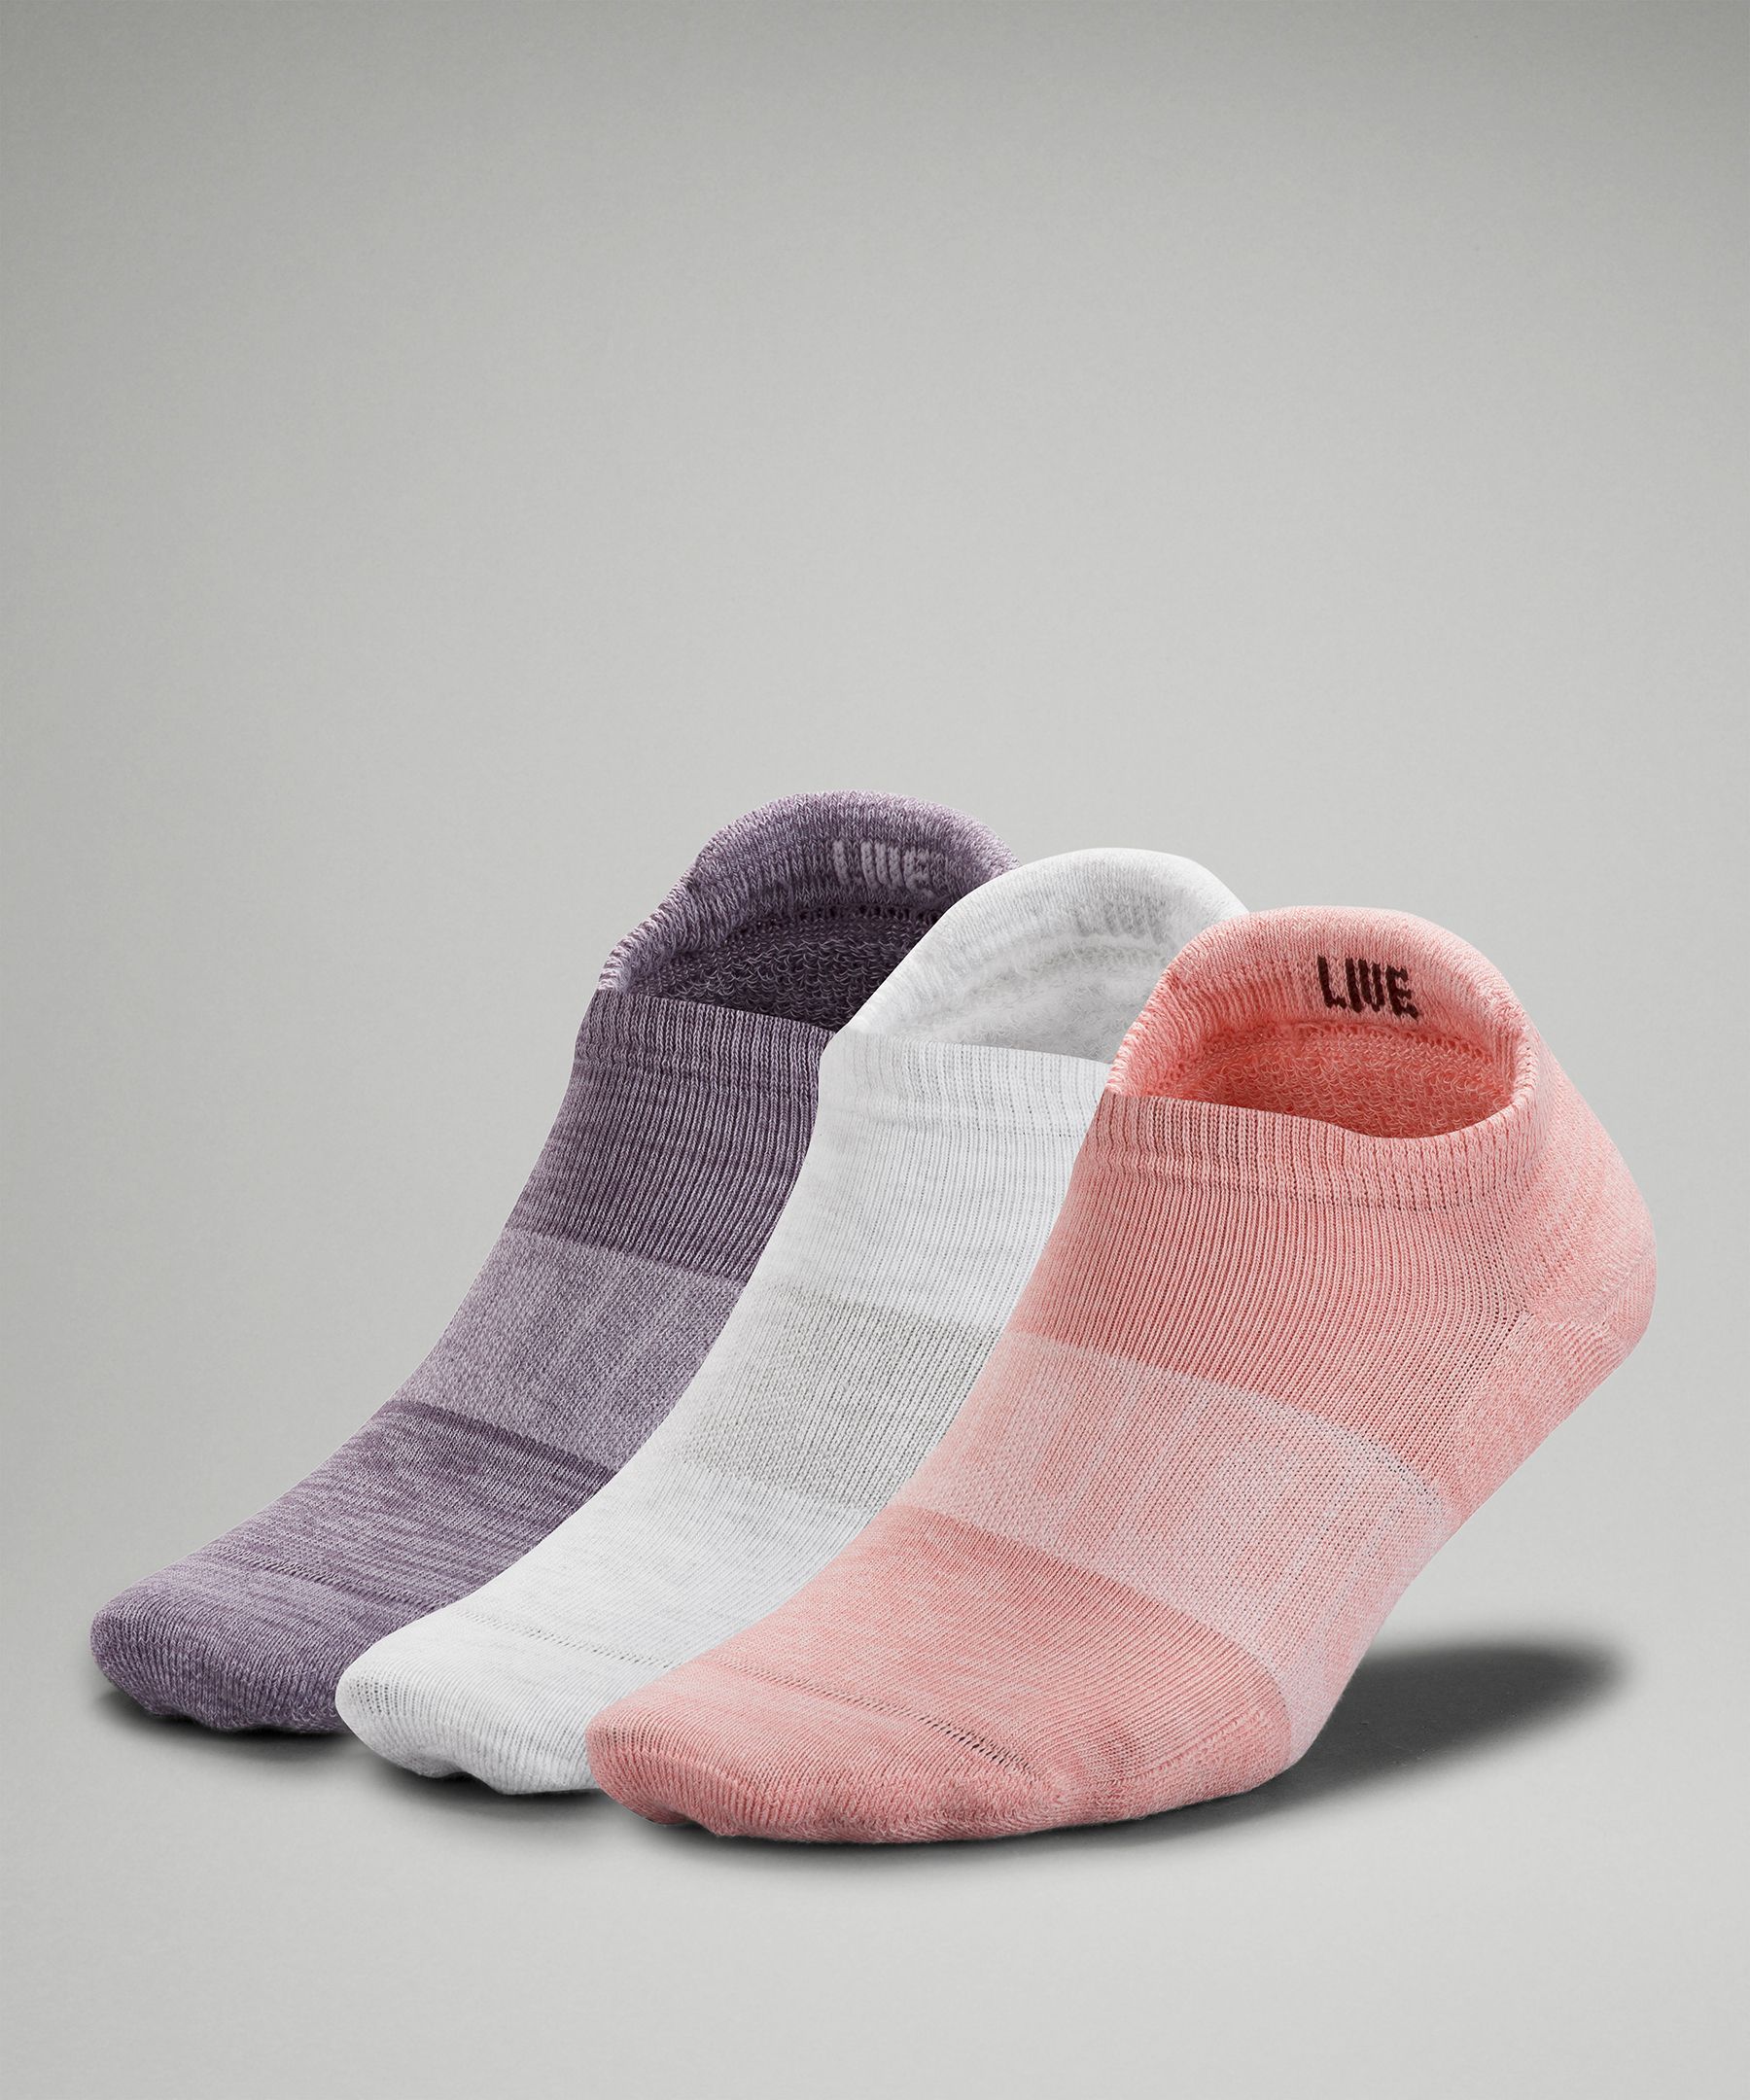 Lululemon Daily Stride Low-ankle Socks 3 Pack In Pink Puff/white/dusky Lavender